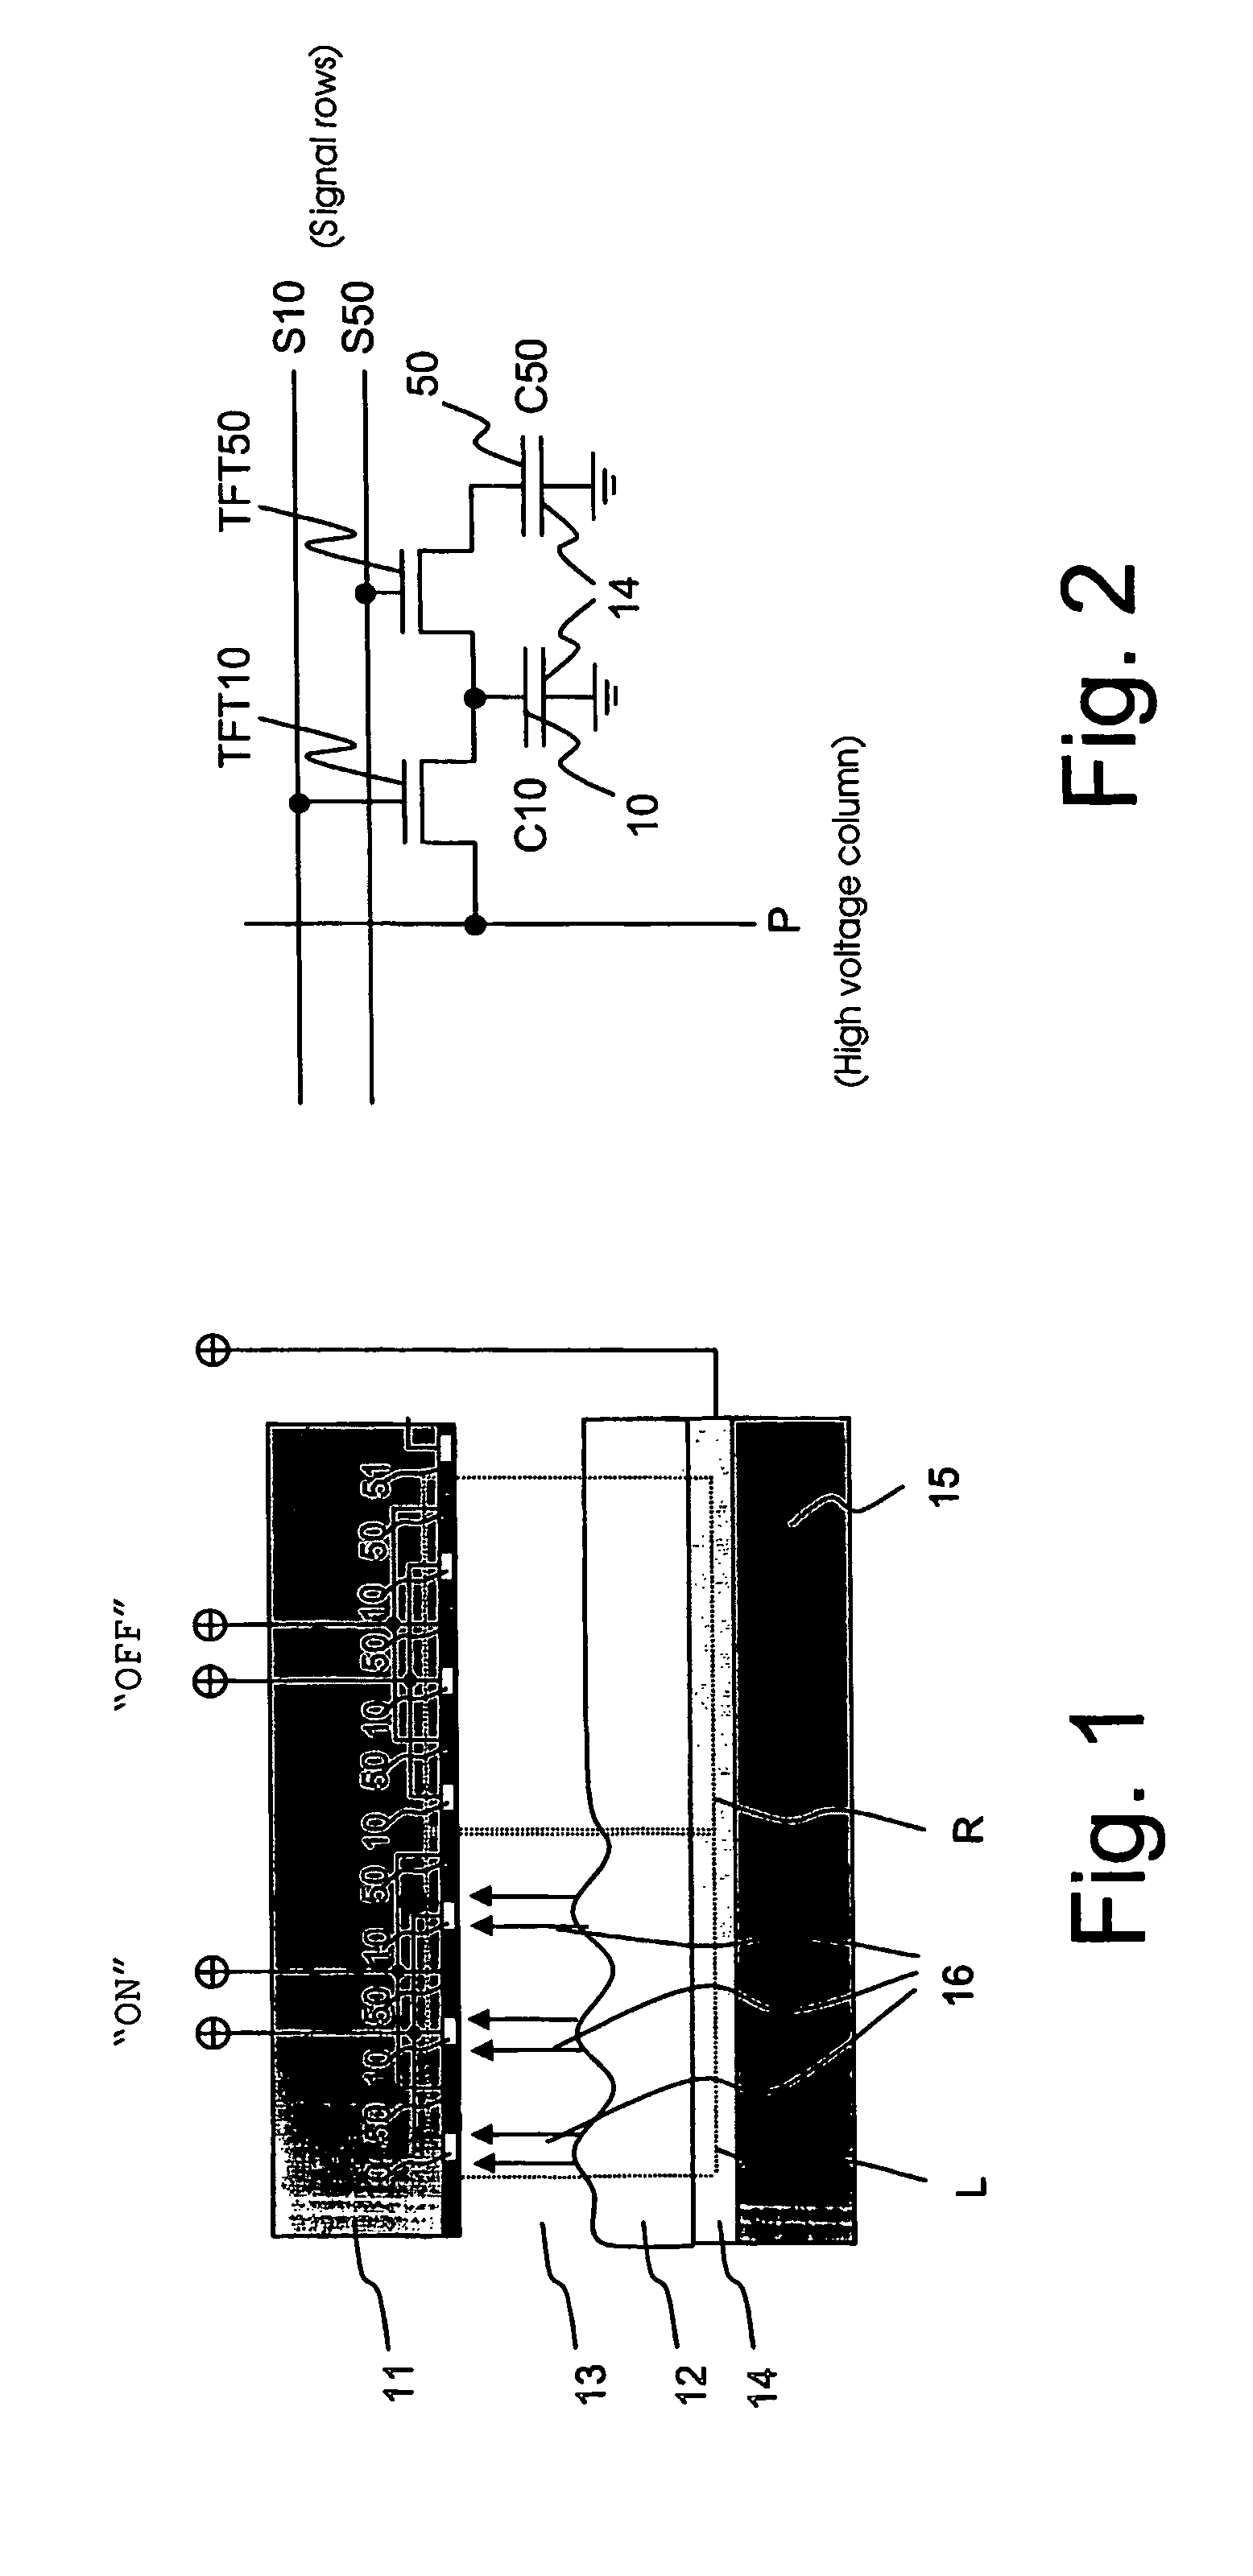 Electrical device utilizing charge recycling within a cell